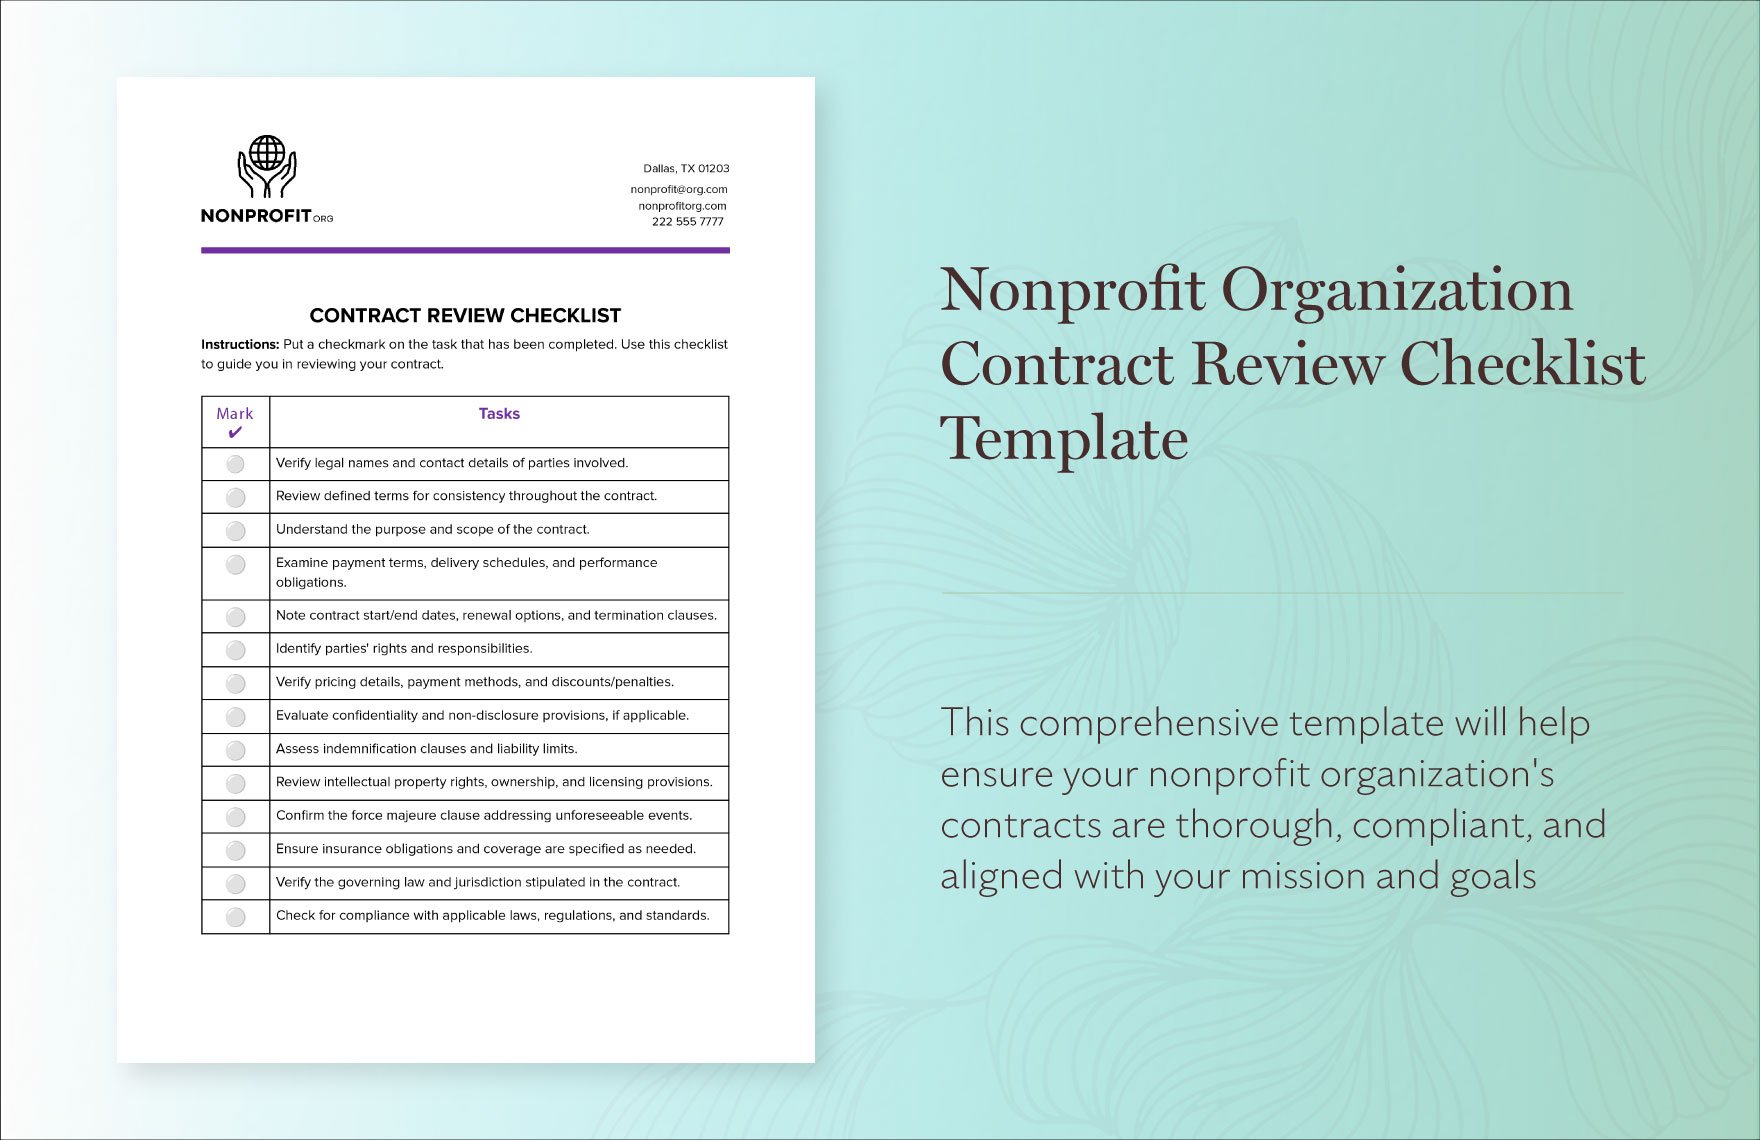 Nonprofit Organization Contract Review Checklist Template in Word, Google Docs, PDF